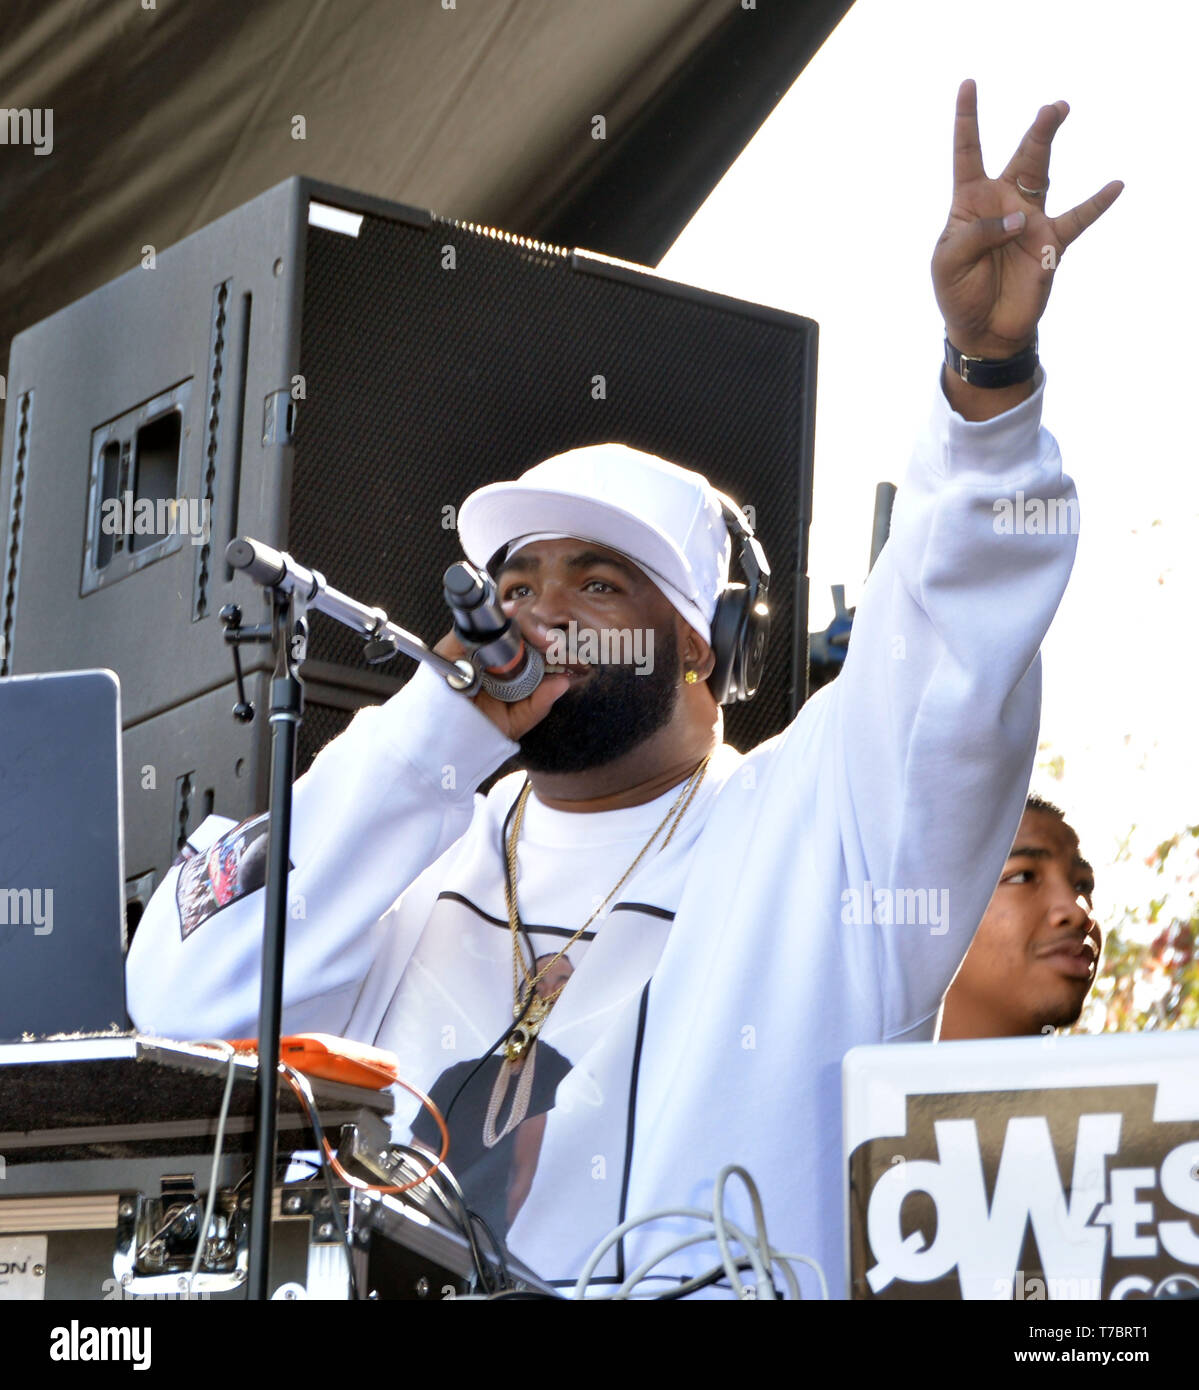 Los Angeles, Ca, USA. 4th May, 2019. DJ BattleCat at The City Of Los Angeles Officially Unveils Obama Boulevard In Honor Of The 44th President Of The United States Of America in Los Angeles, California on May 3, 2019. Credit: Koi Sojer/Snap'n U Photos/Media Punch/Alamy Live News Stock Photo